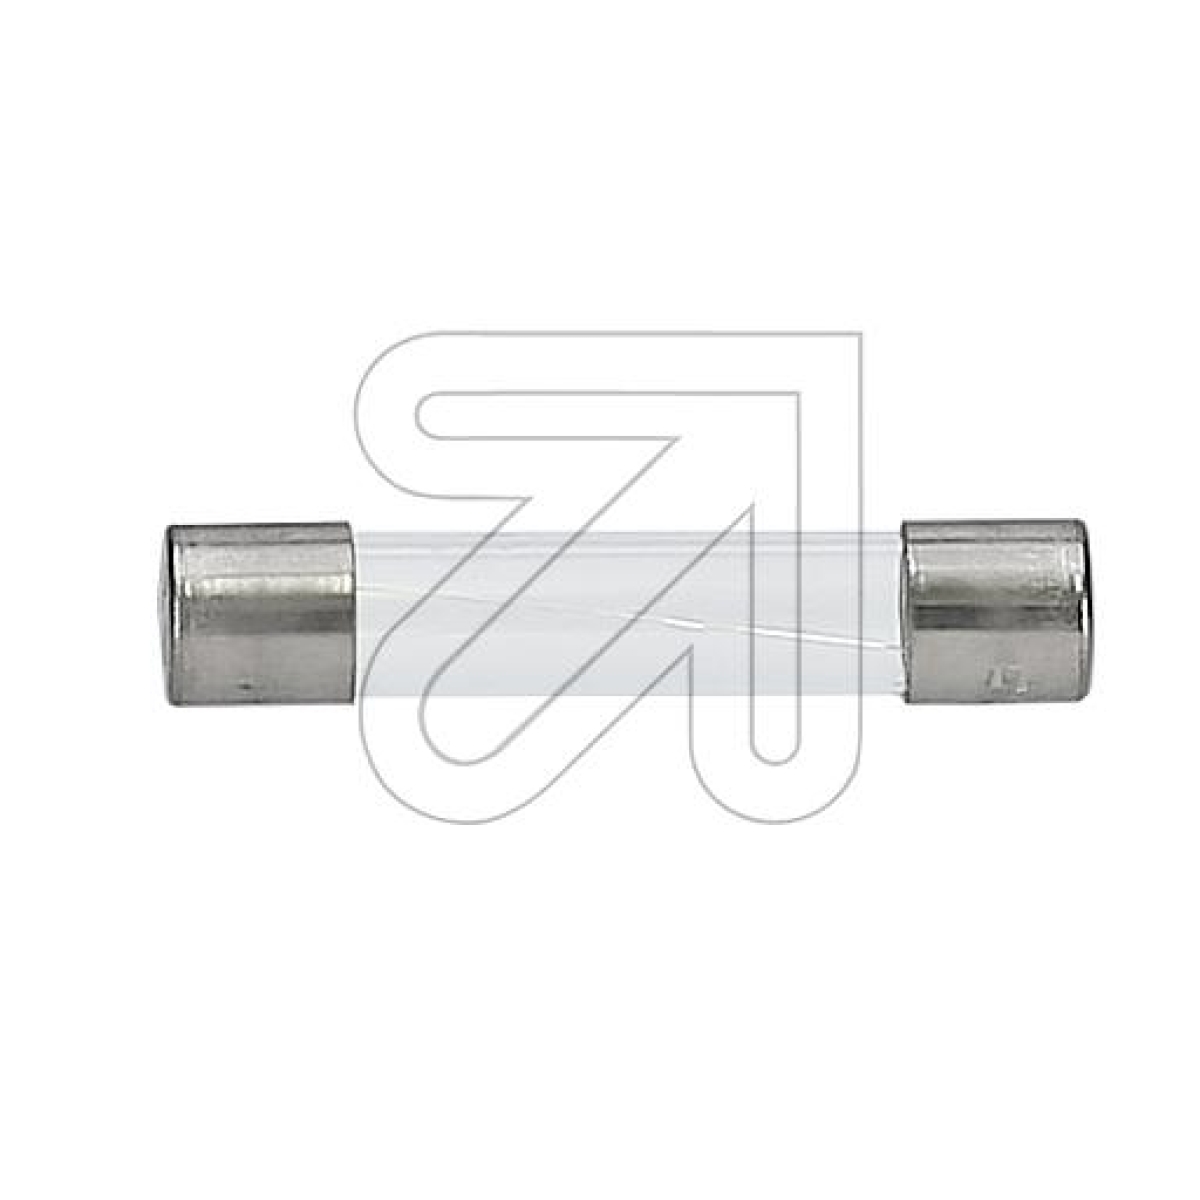 ELUFine-acting fuse, quick-acting 6.3x32 2.0A-Price for 10 pcs.Article-No: 187030